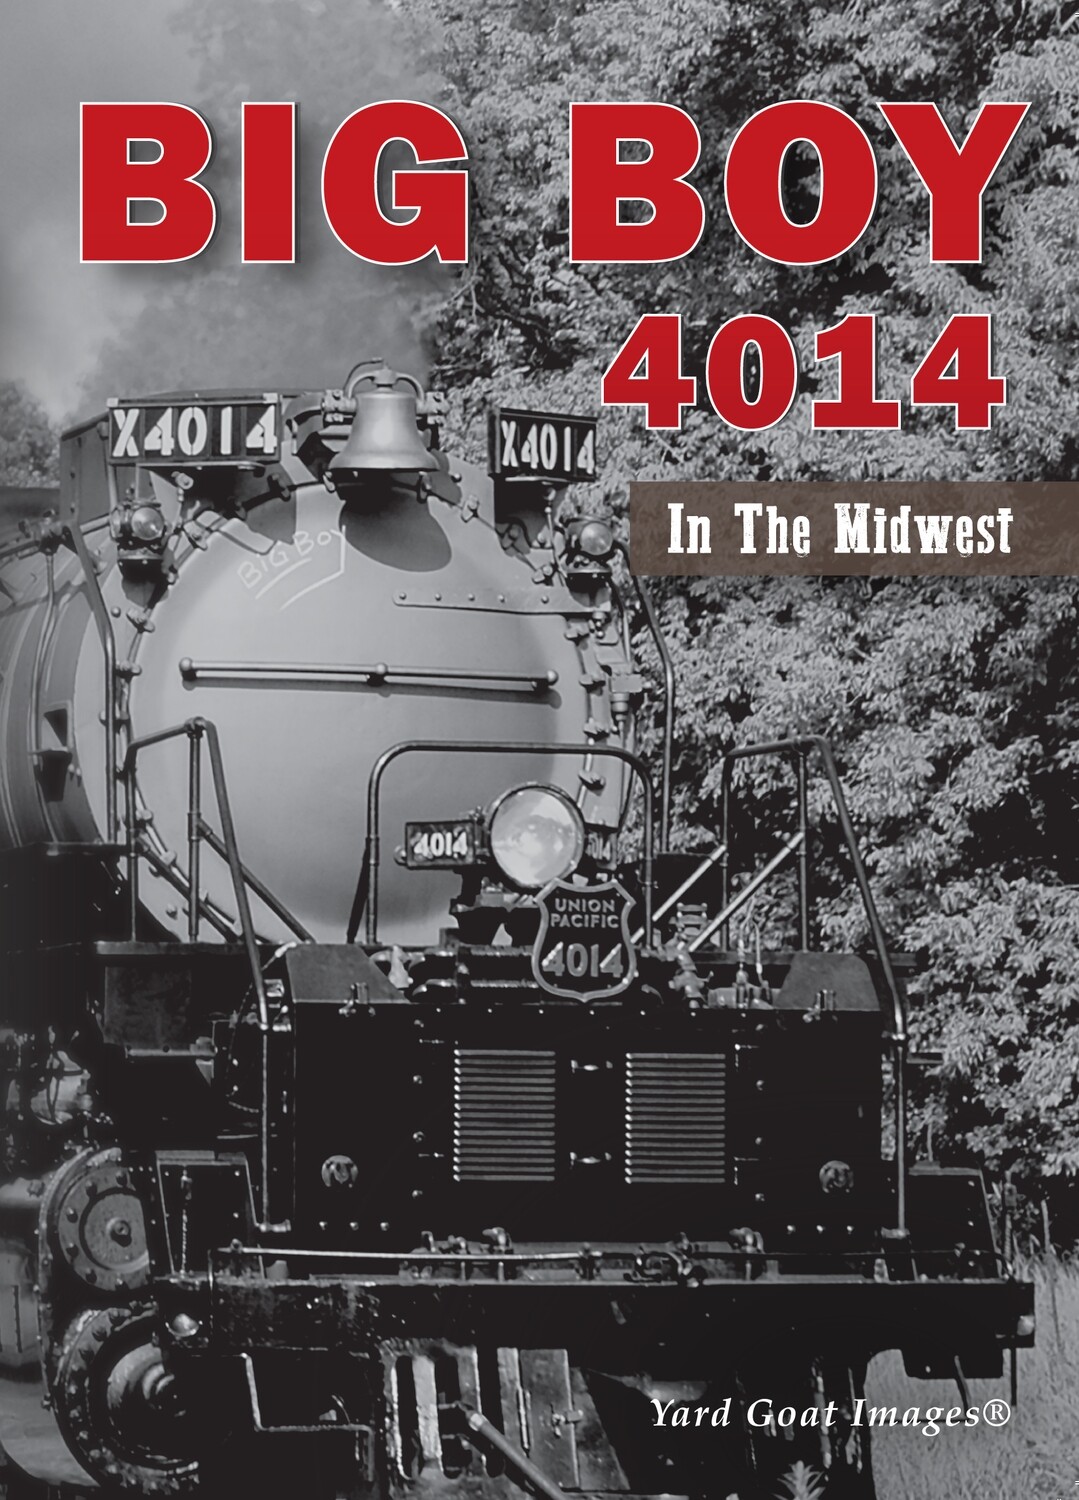 Big Boy 4014 In The Midwest